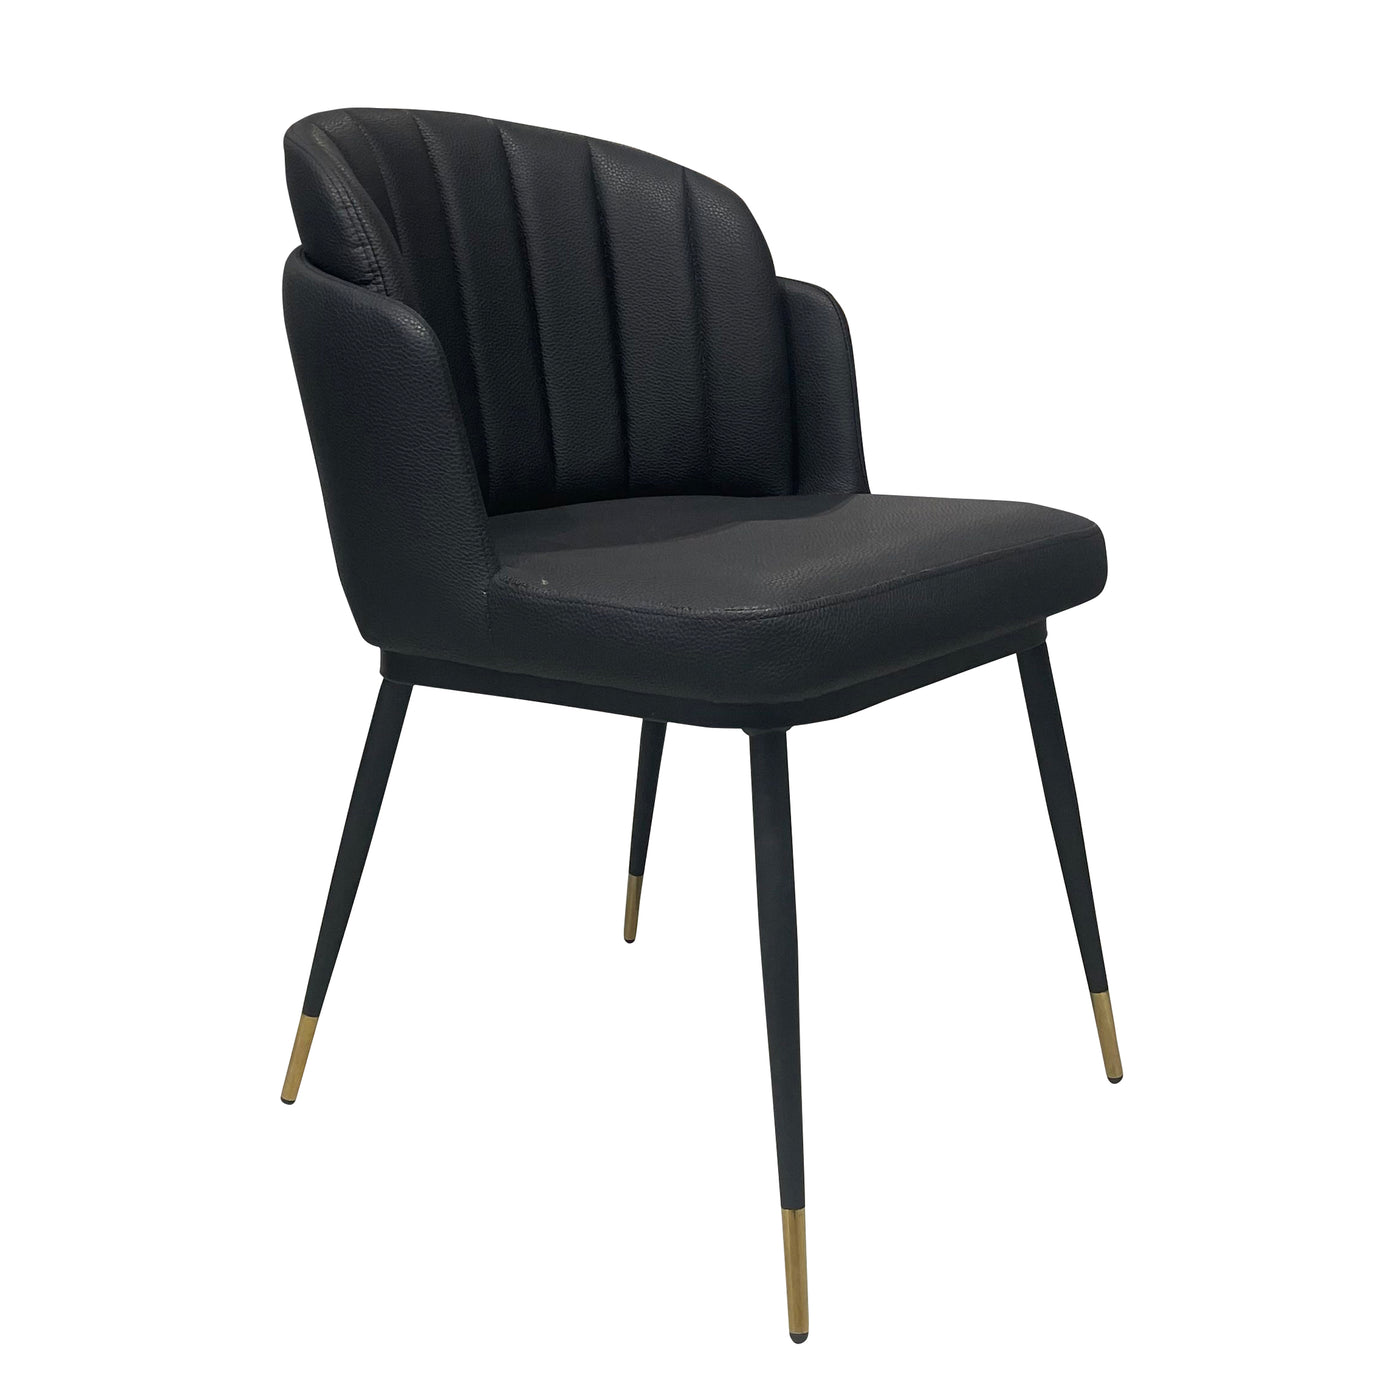 Talulah Dining Chair Black Leather Look - Future Classics Furniture